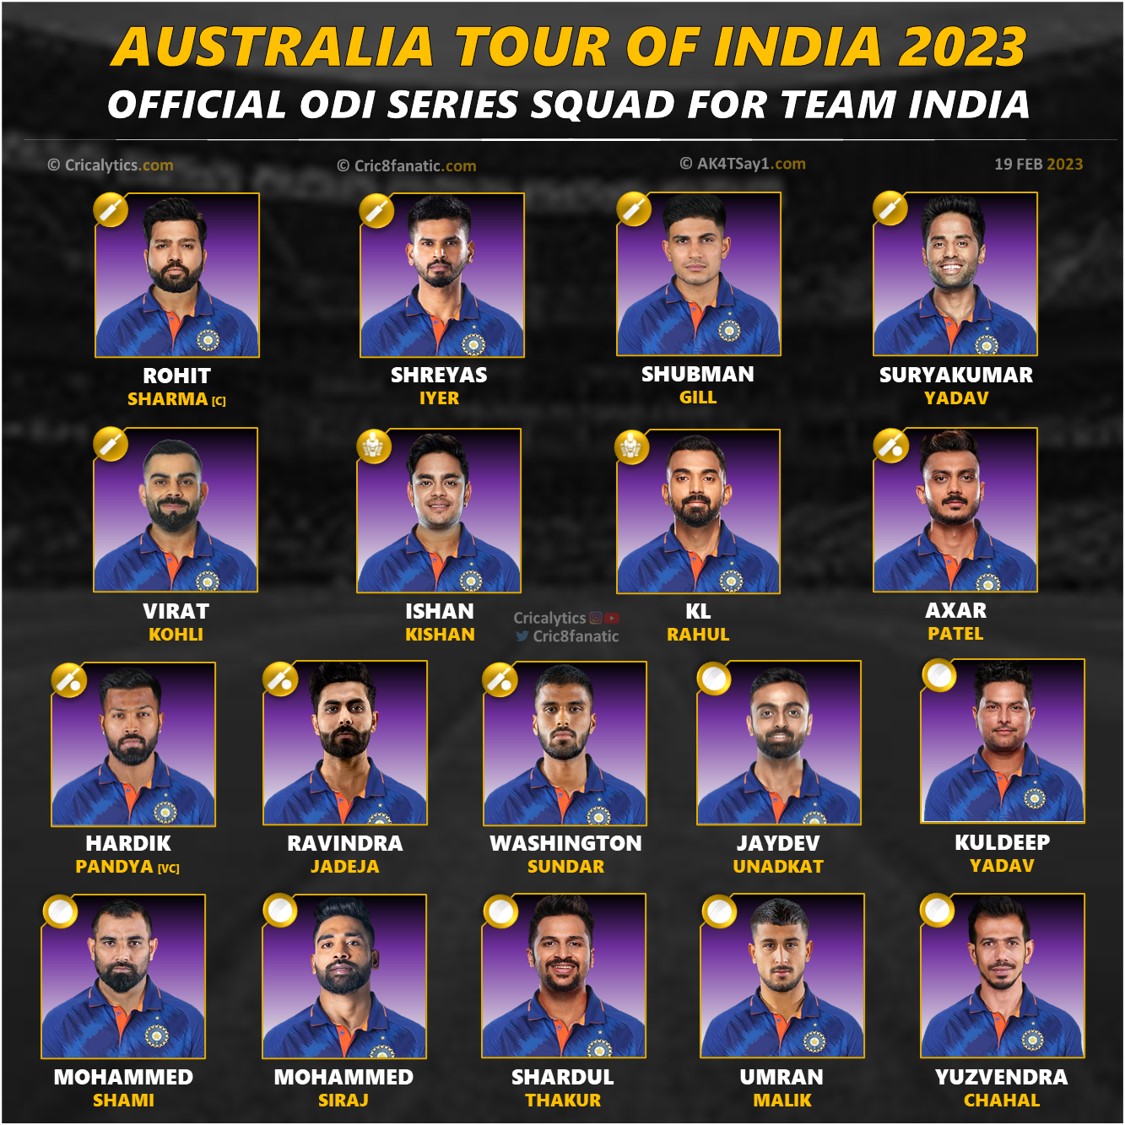 india vs australia 2023 official odi series squad and players list